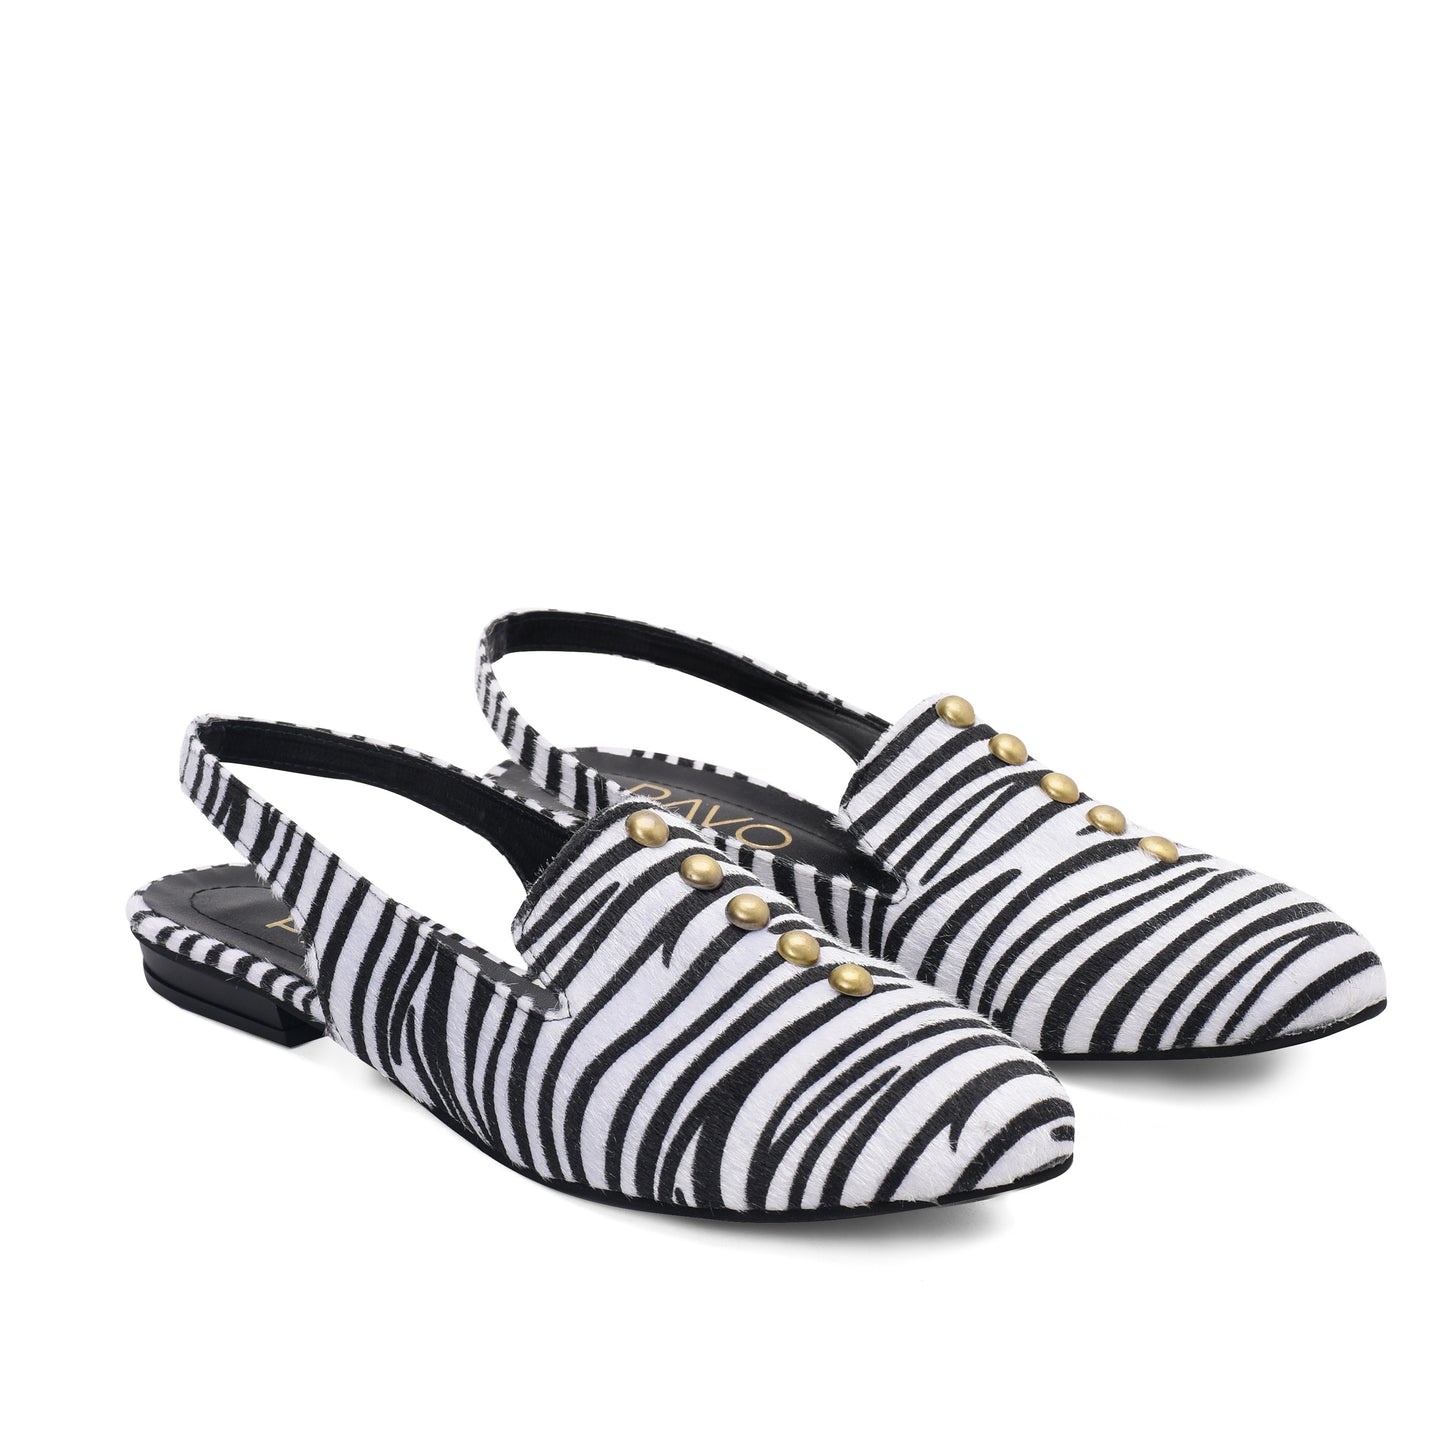 Espadrilles Sira with Black and white